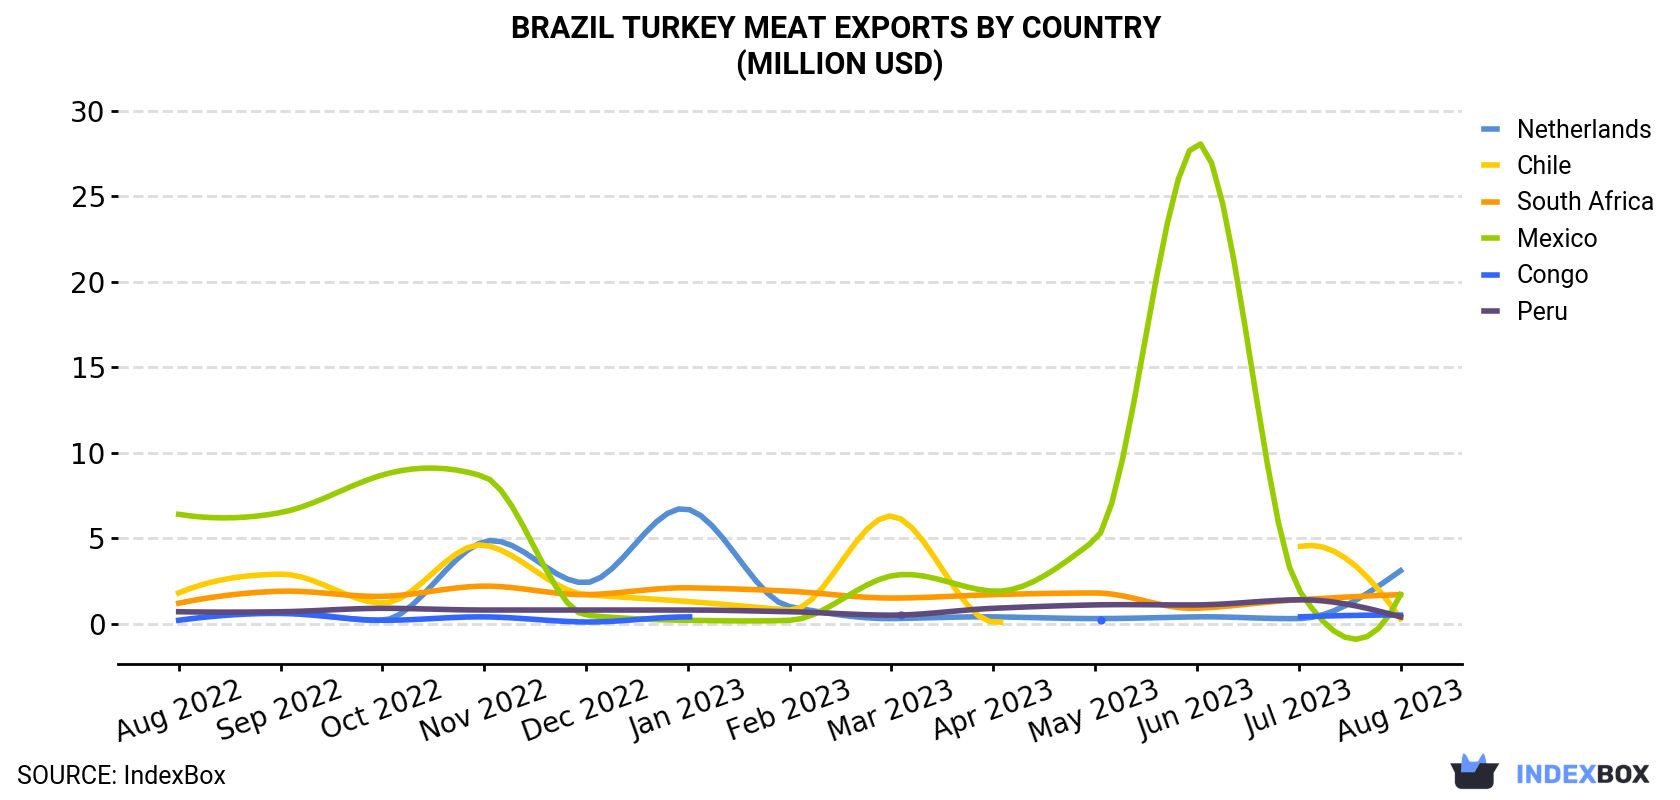 Brazil Turkey Meat Exports By Country (Million USD)